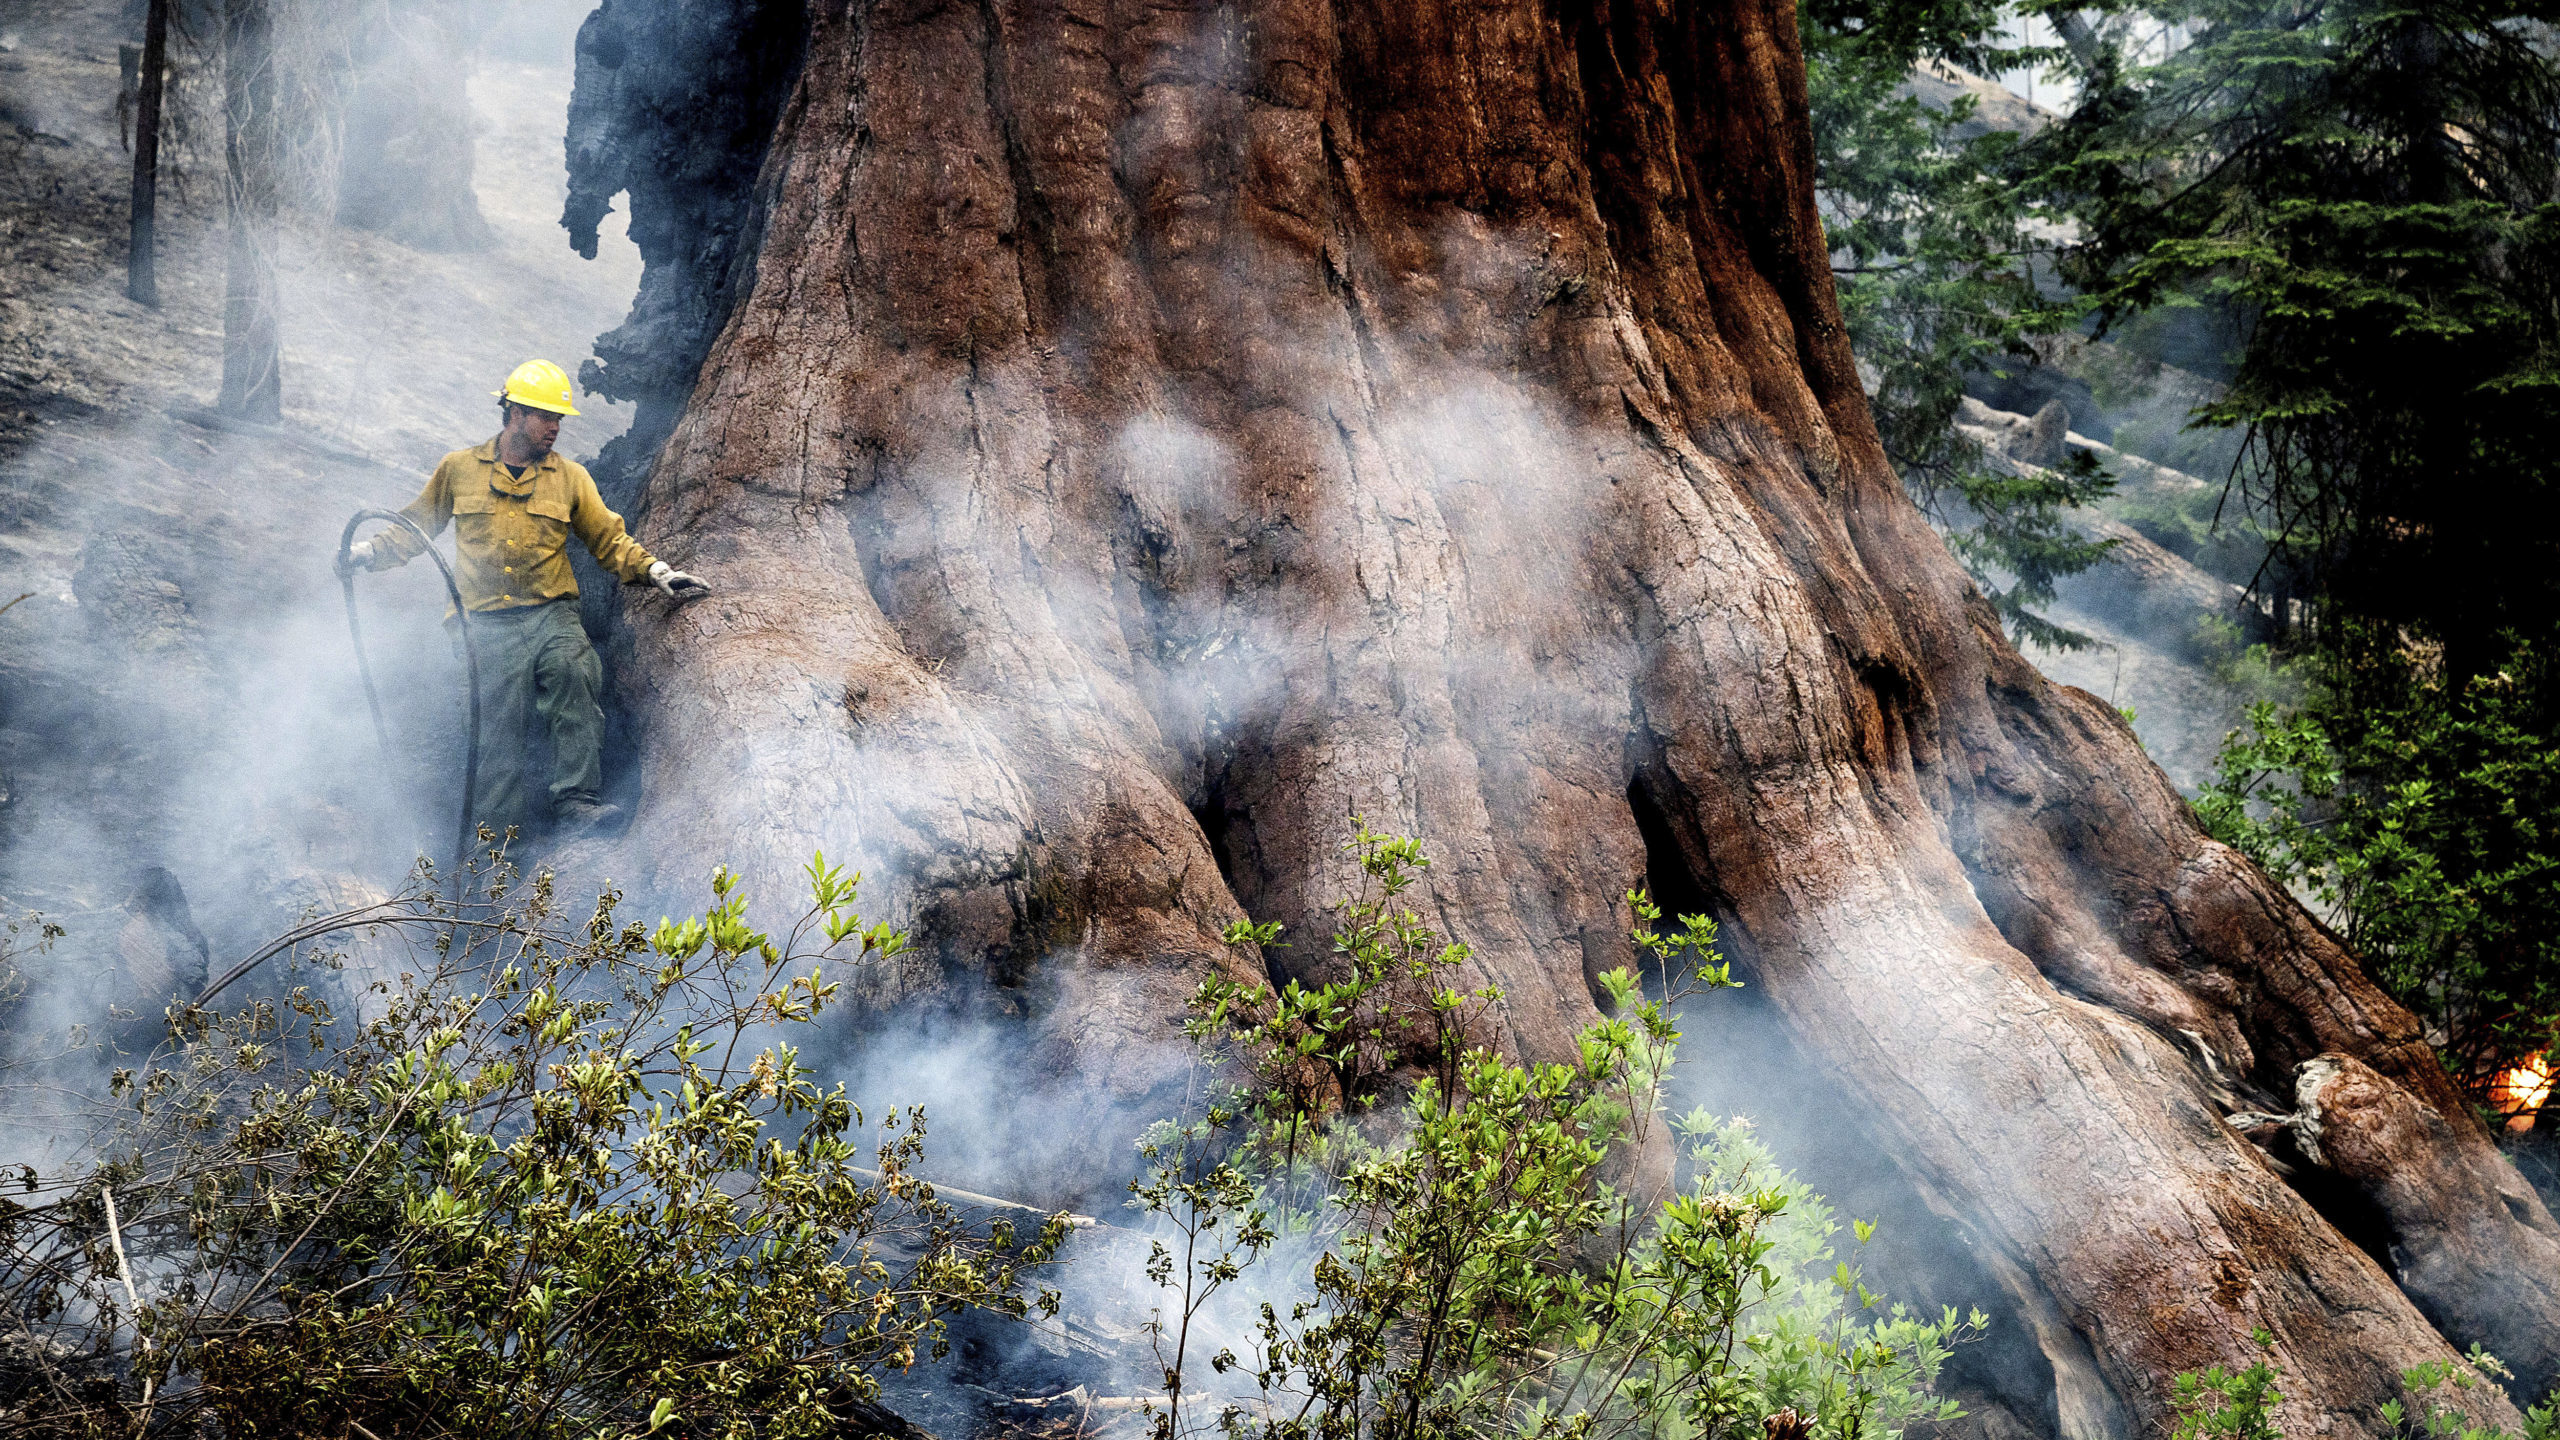 A firefighter protects a sequoia tree as the Washburn Fire burns in Mariposa Grove in Yosemite Nati...